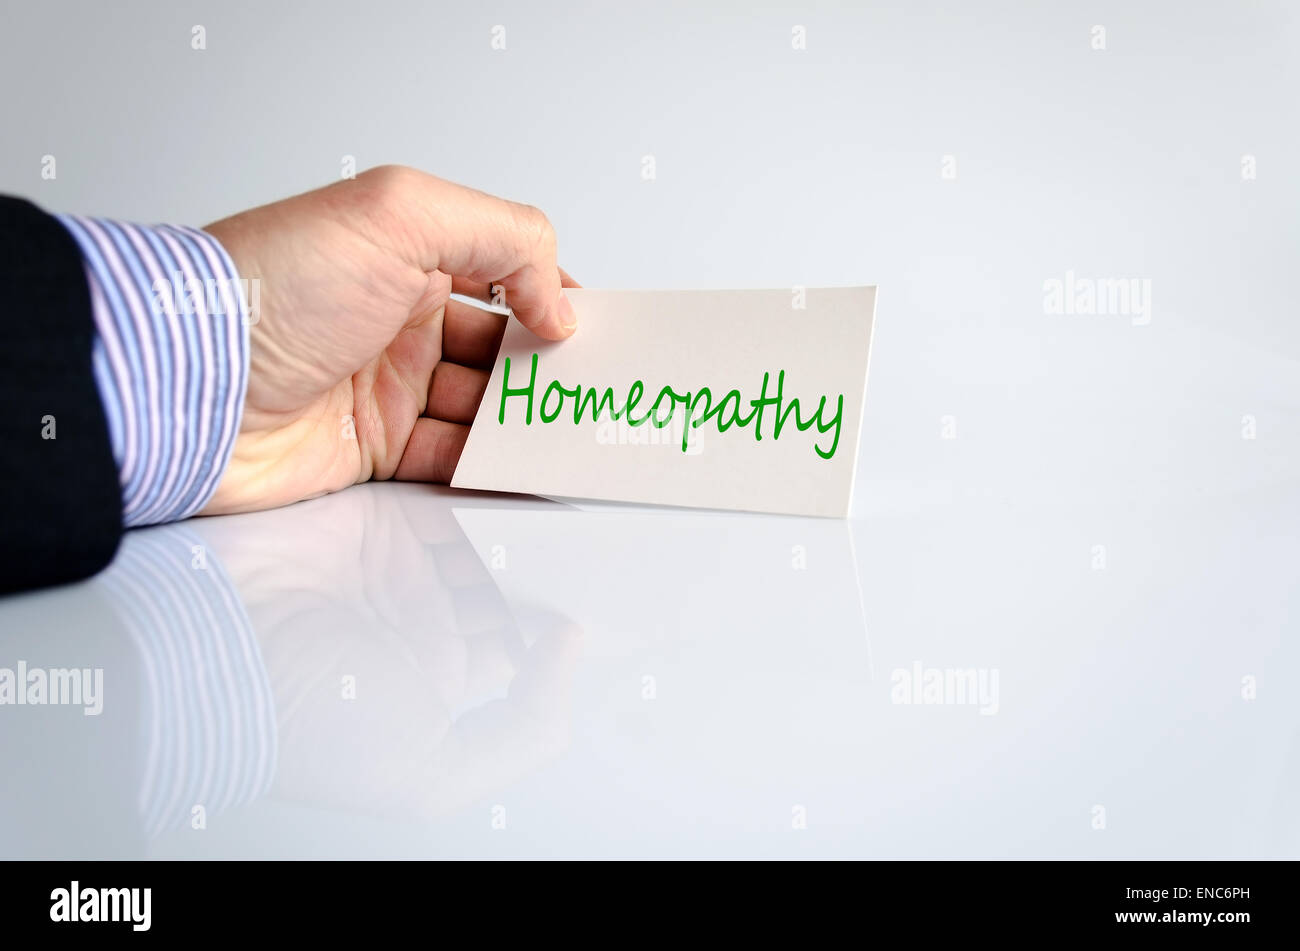 Business man hand and note homeopathy concept Stock Photo